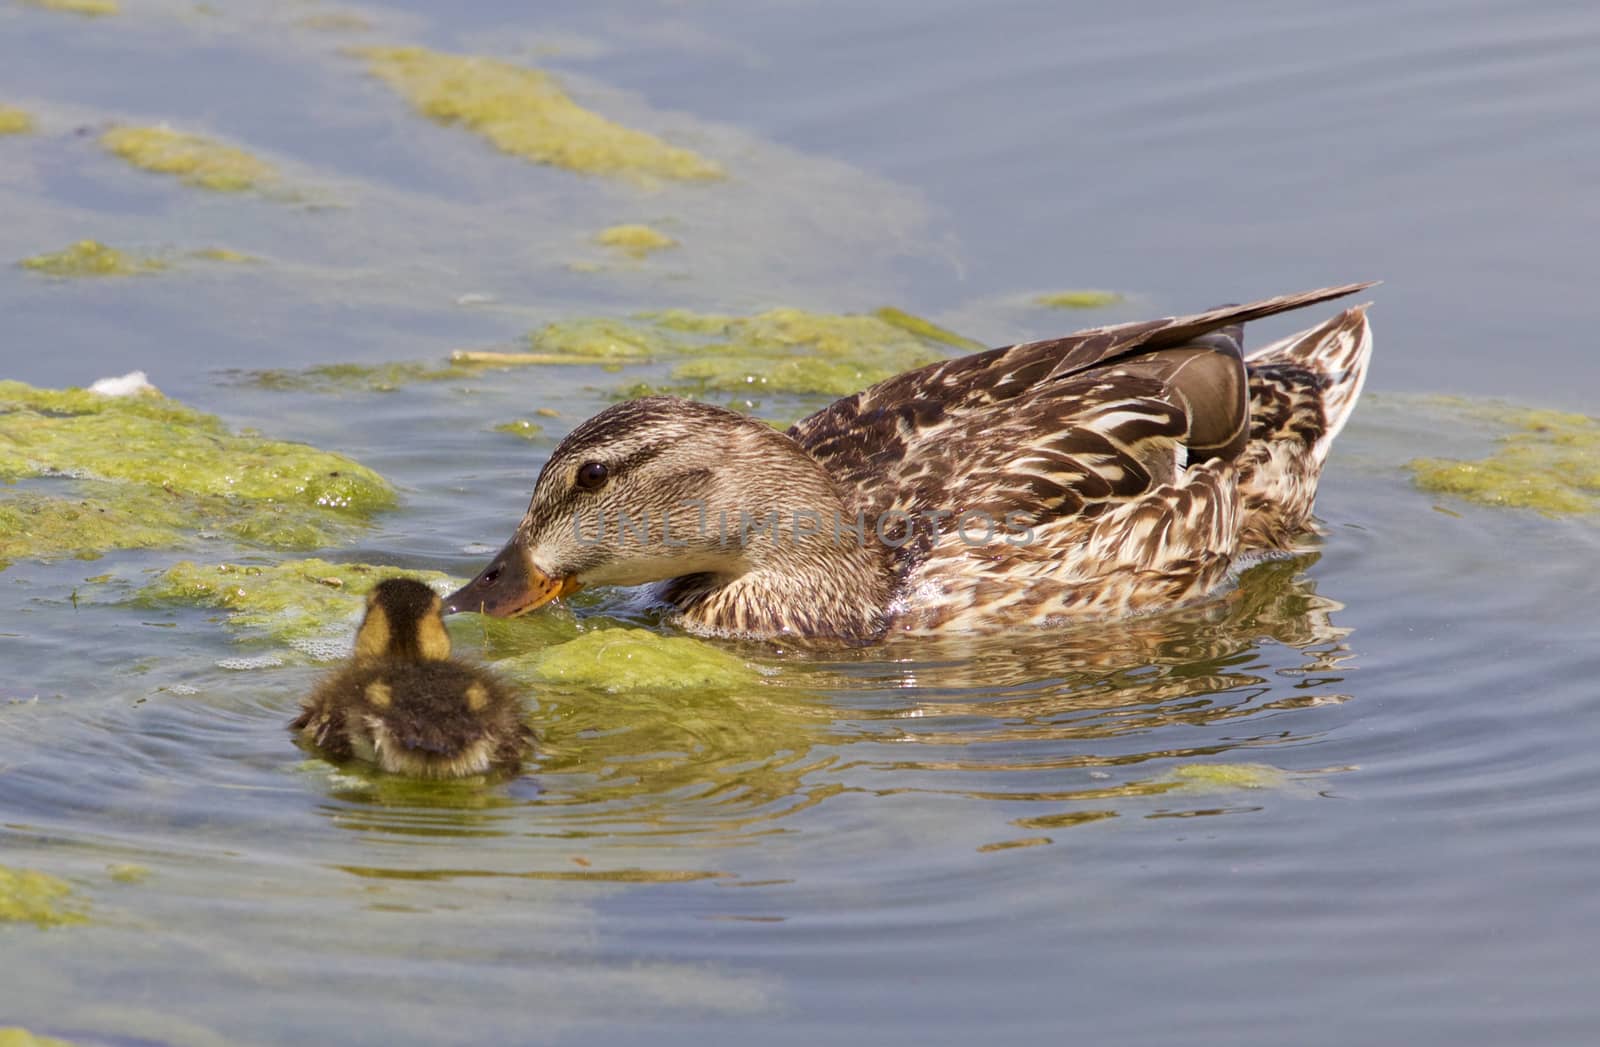 The mother-duck and her chick by teo